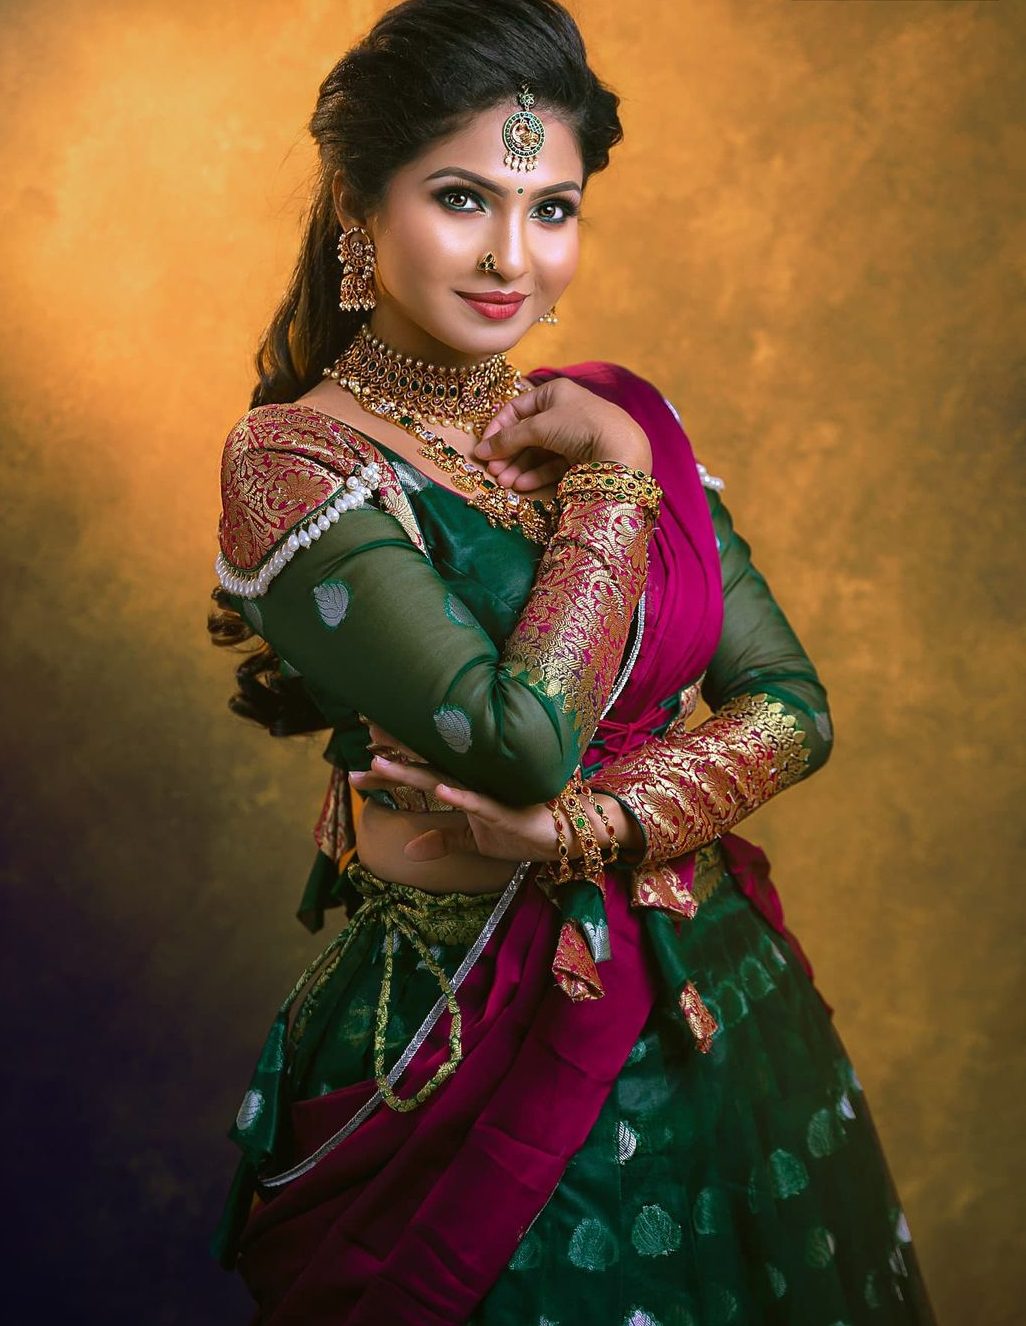 Venba In Dark Green Lehenga With Embellishing Blouse Styled With Polki Jewellery Is the Perfect Bridal Look